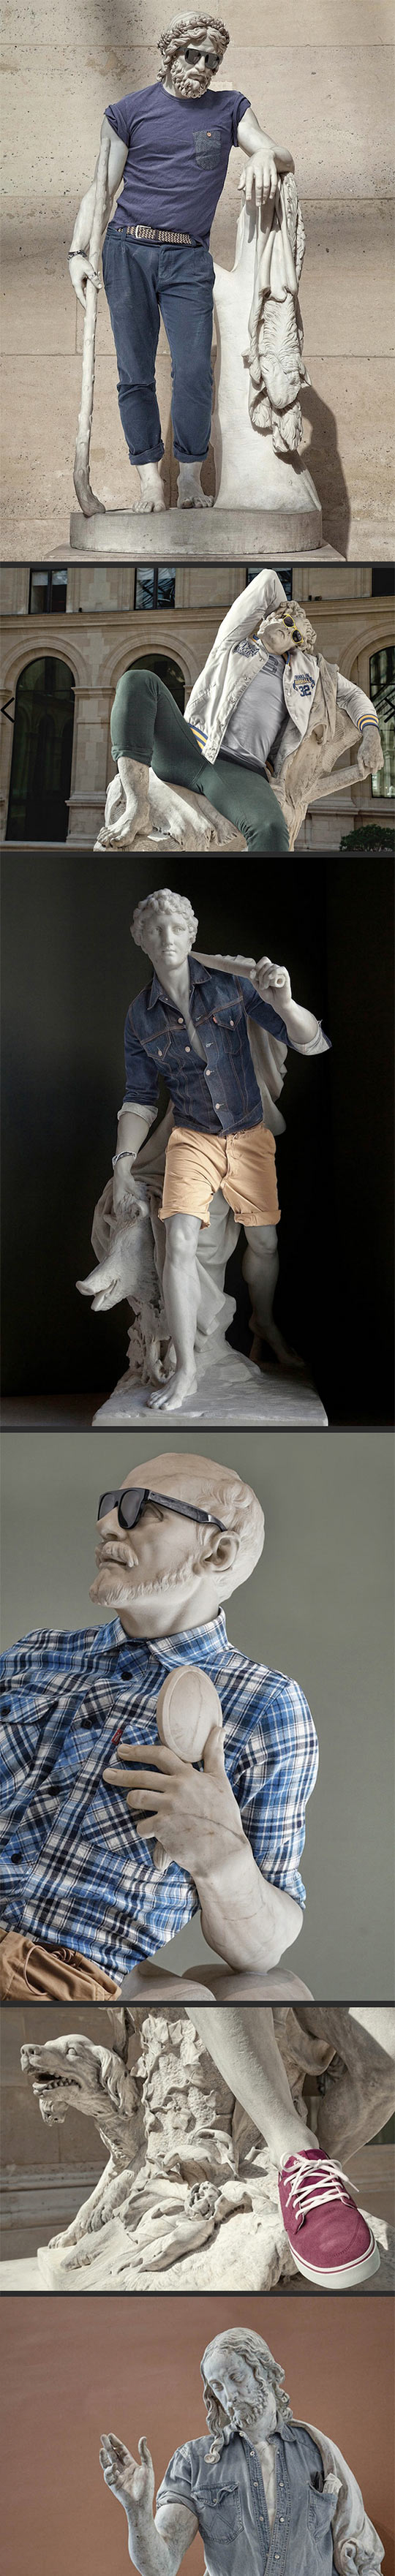 Sculptures in modern day clothes…